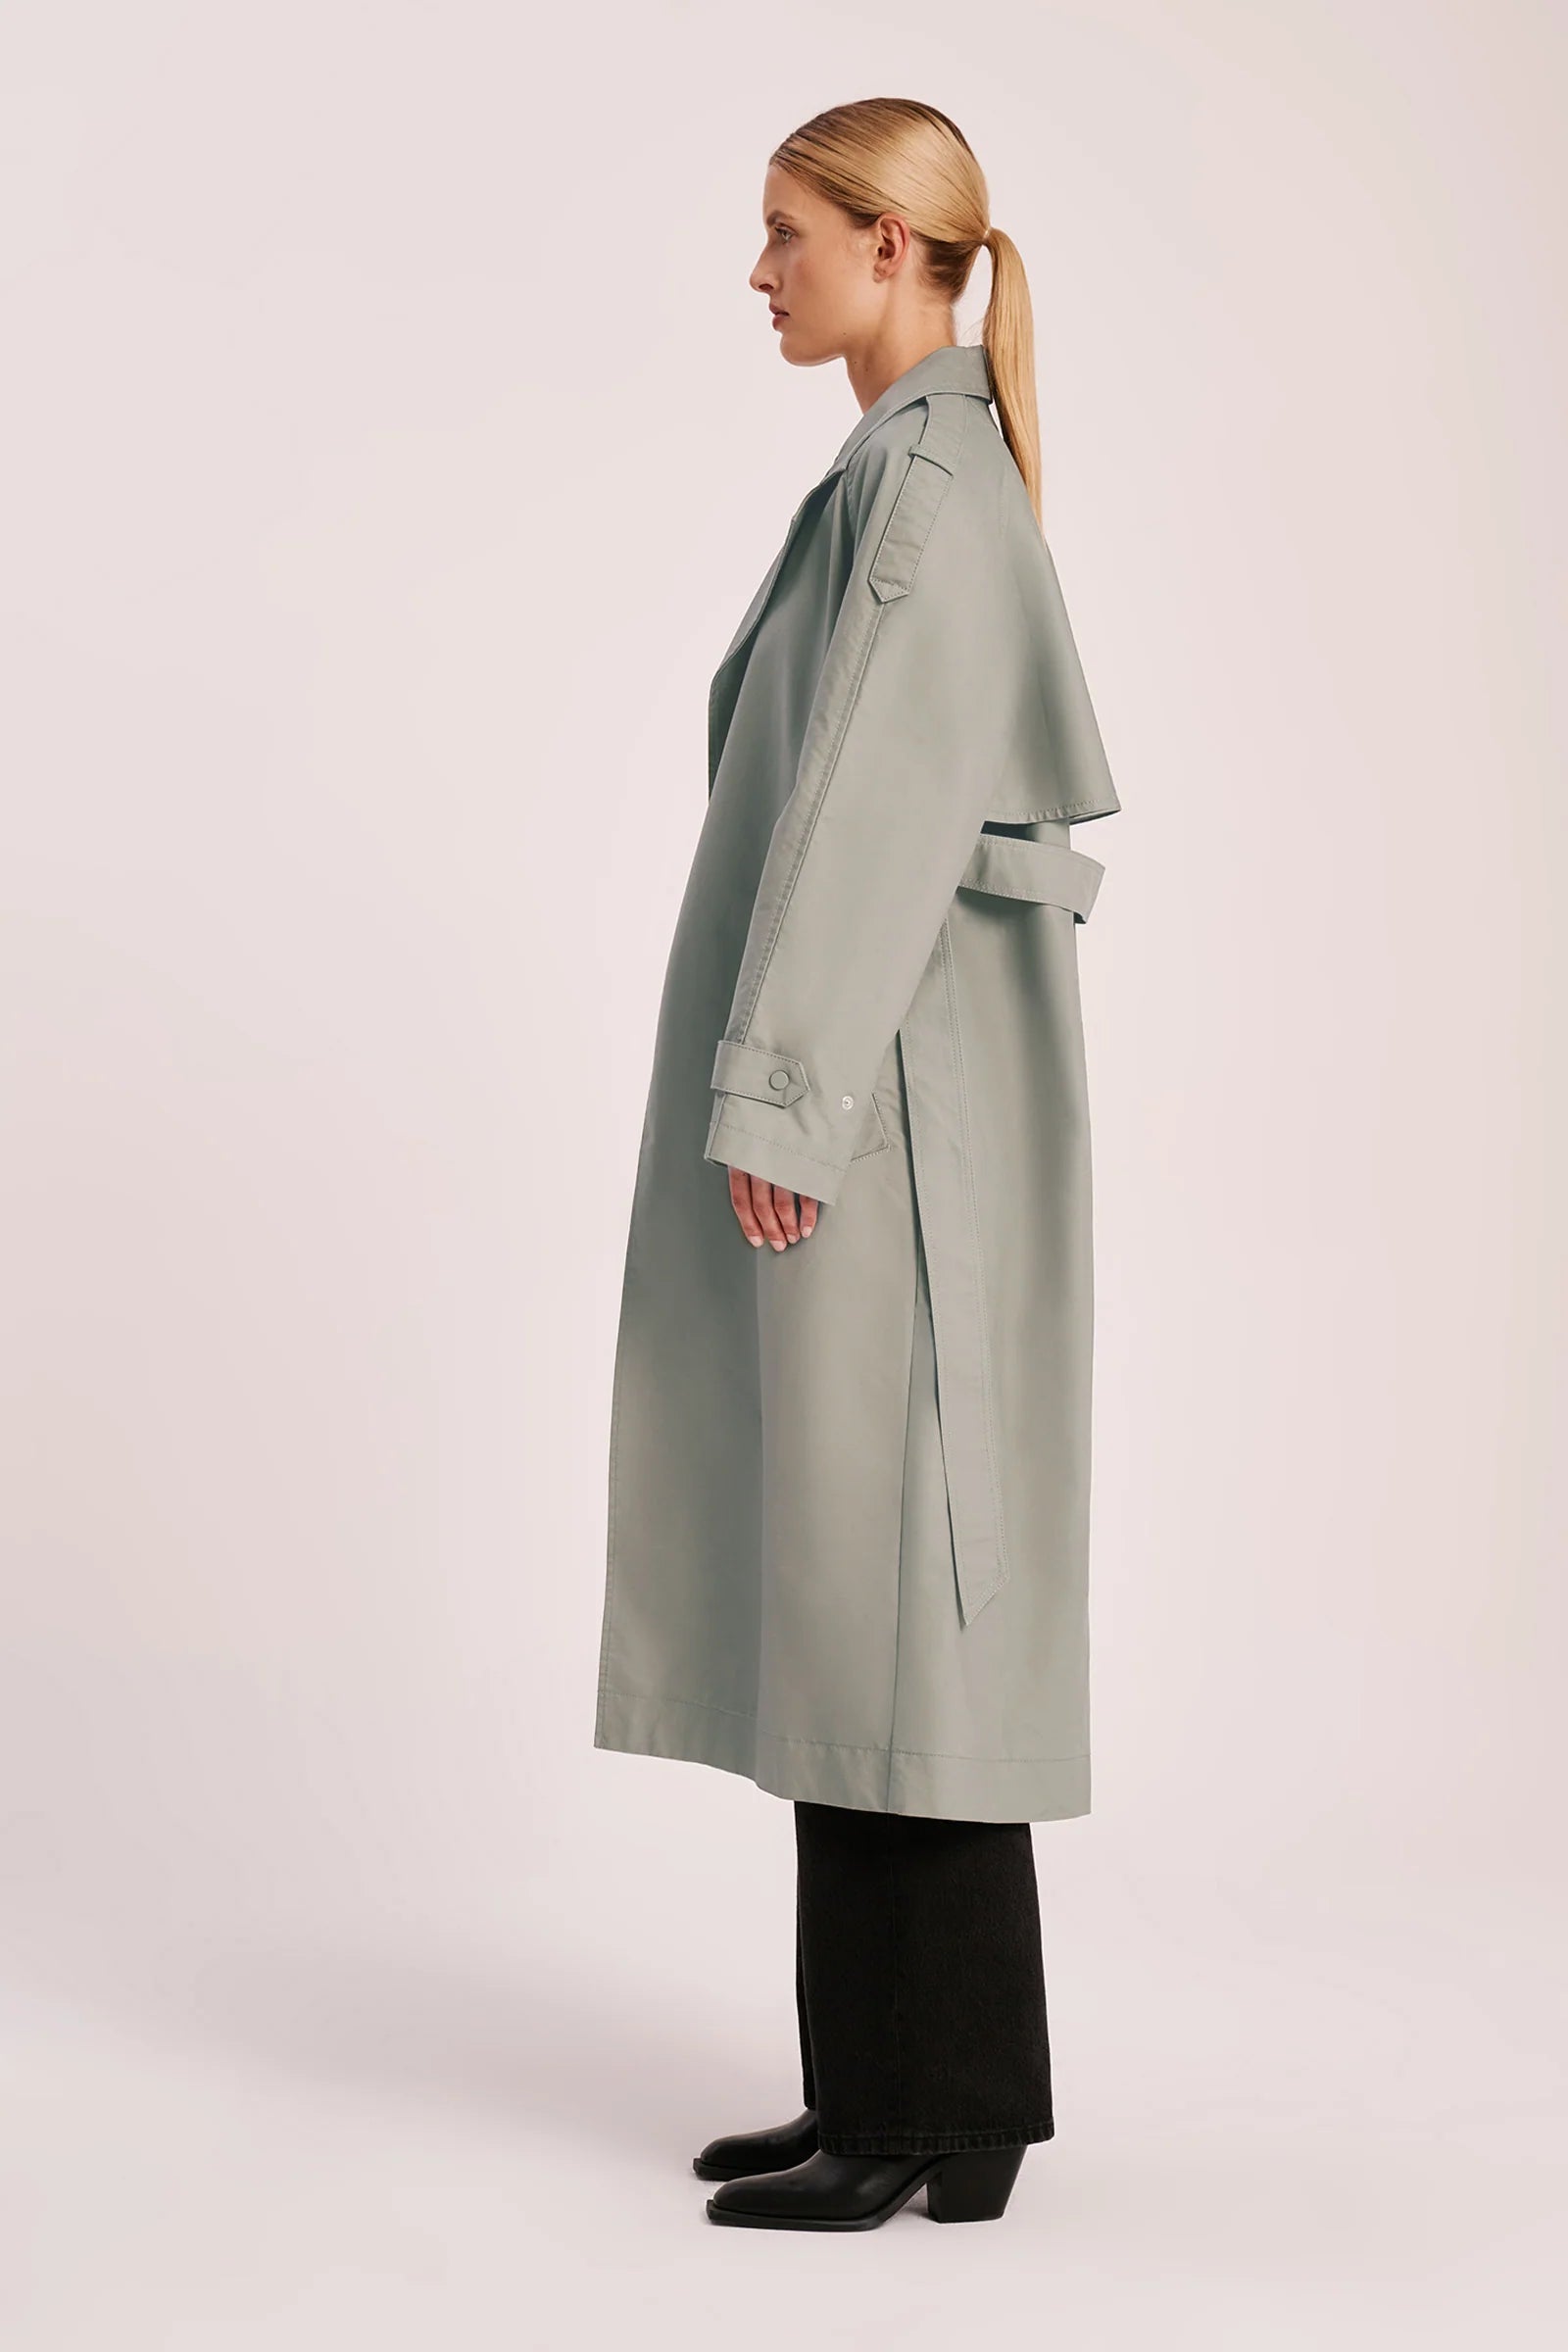 Nude Lucy | Frieda Trench - Pewter